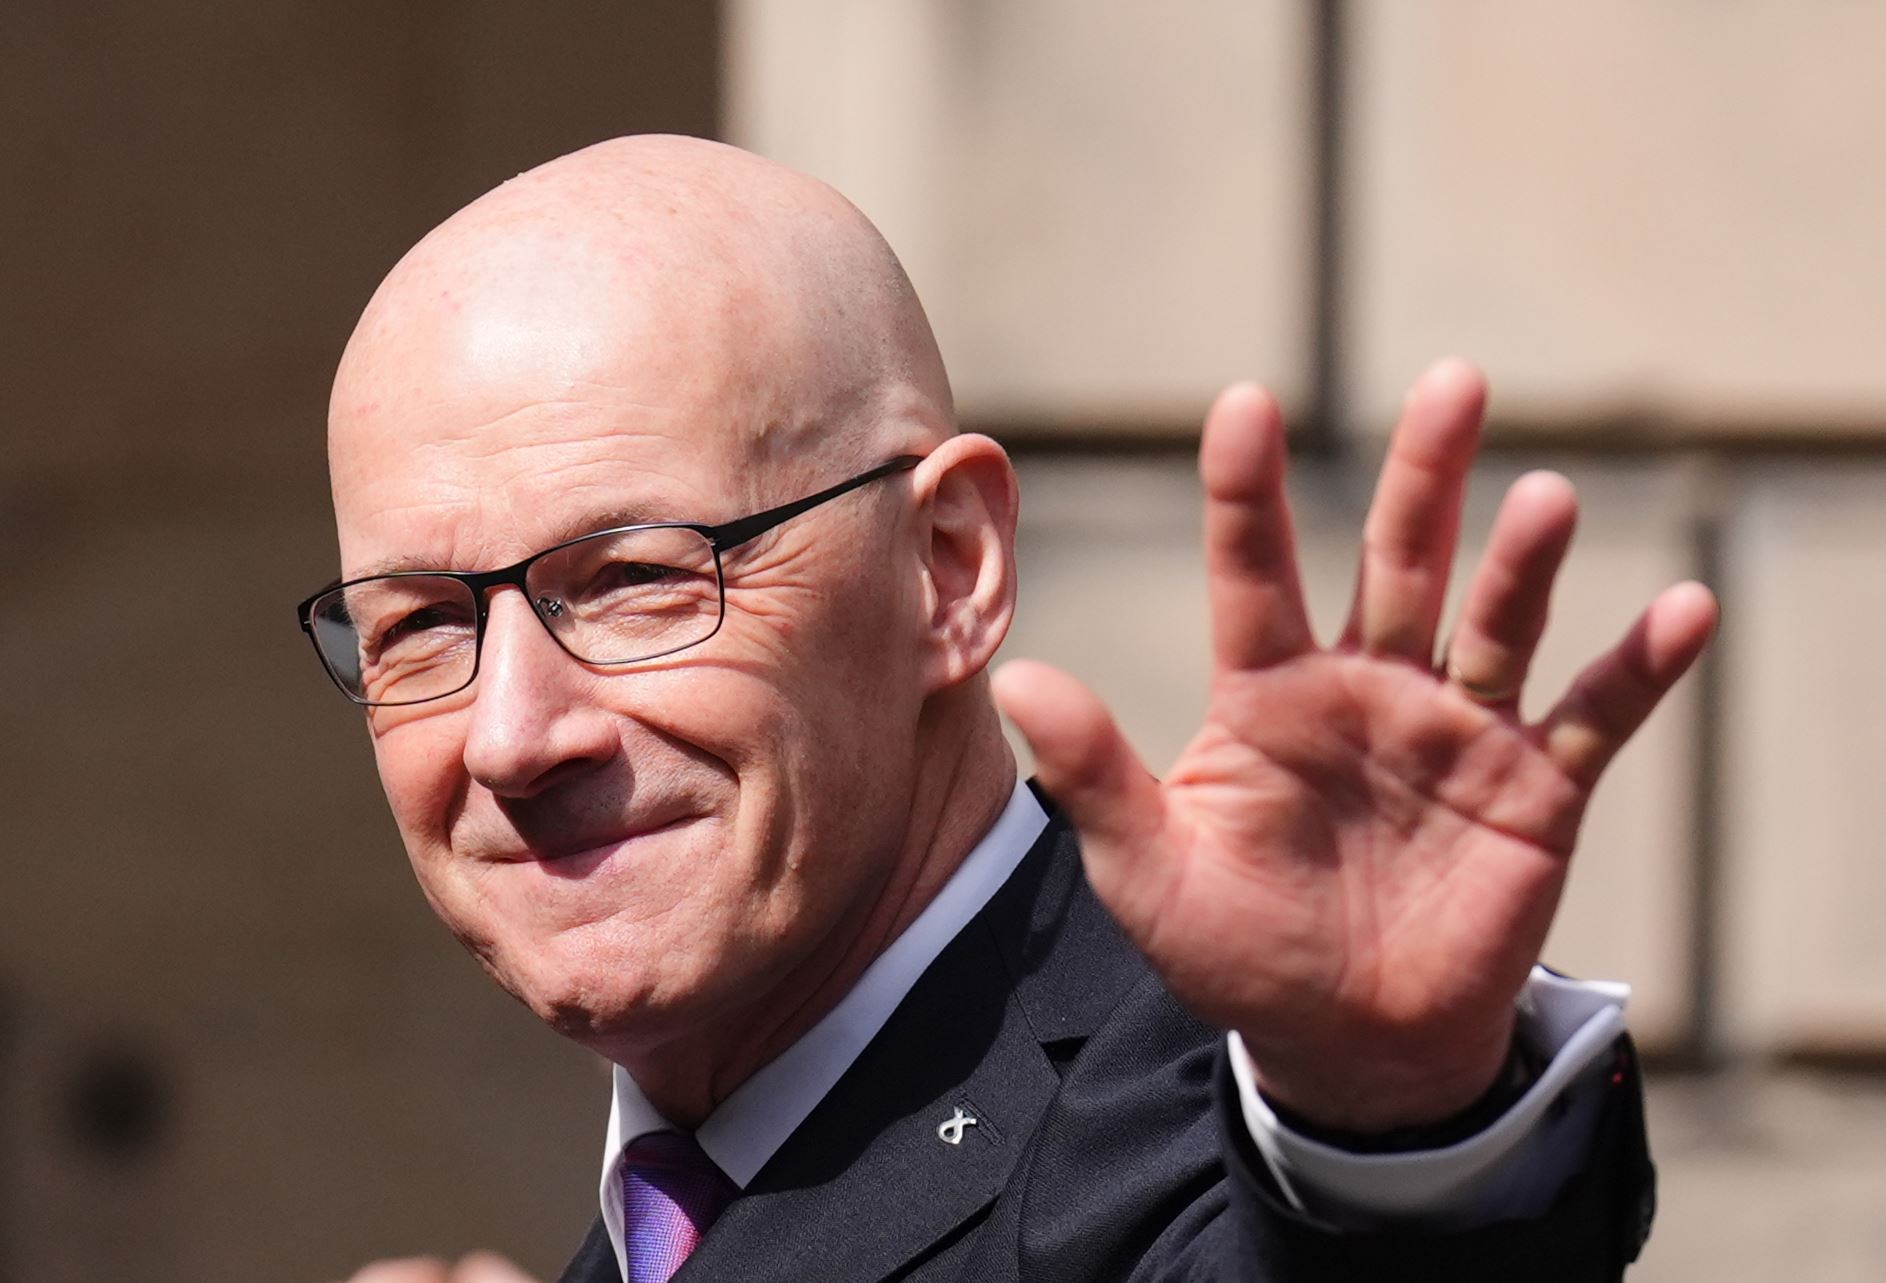 John Swinney became Scotland’s new First Minister this week (Andrew Milligan/PA)